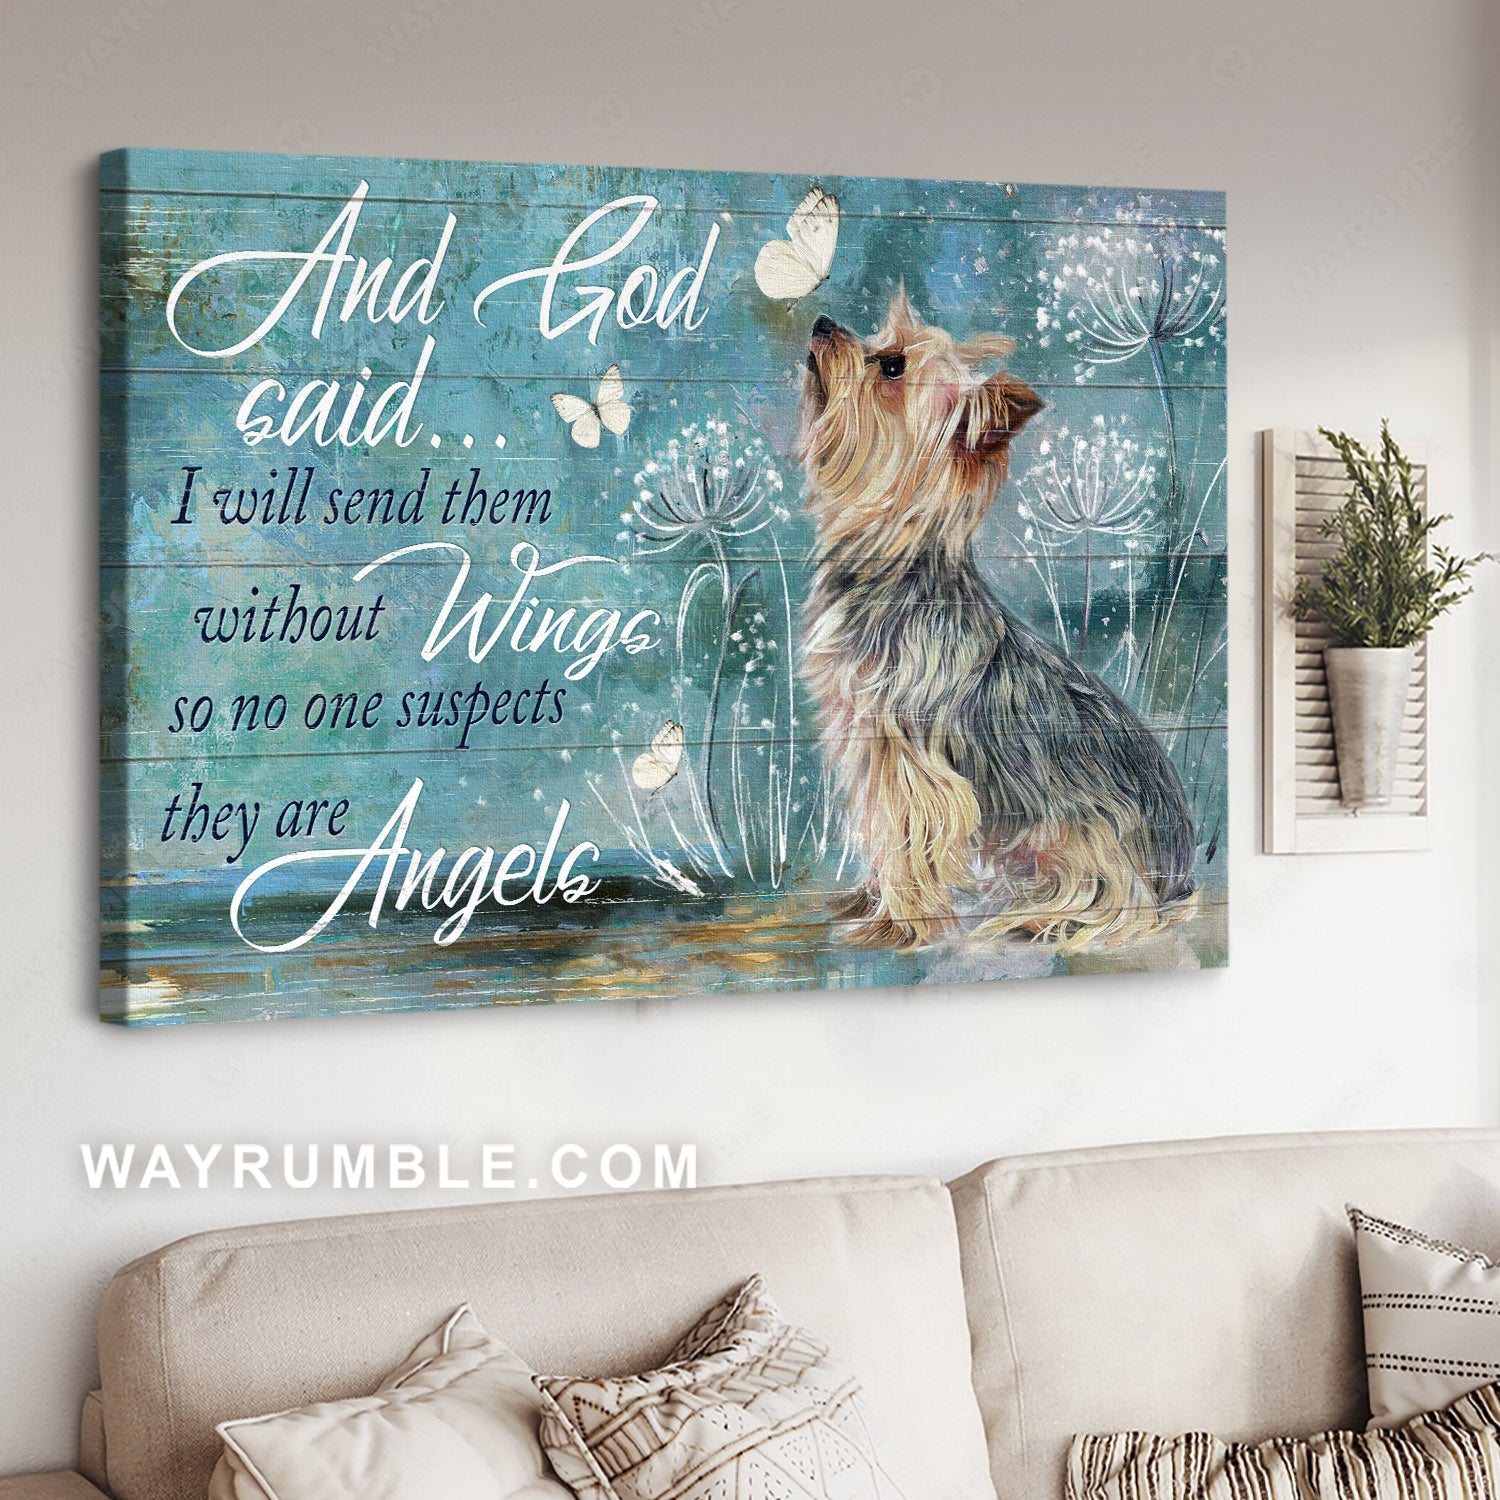 Yorkshire Terrier, Dog drawing, White butterfly, And God said - Jesus Landscape Canvas Prints, Home Decor Wall Art